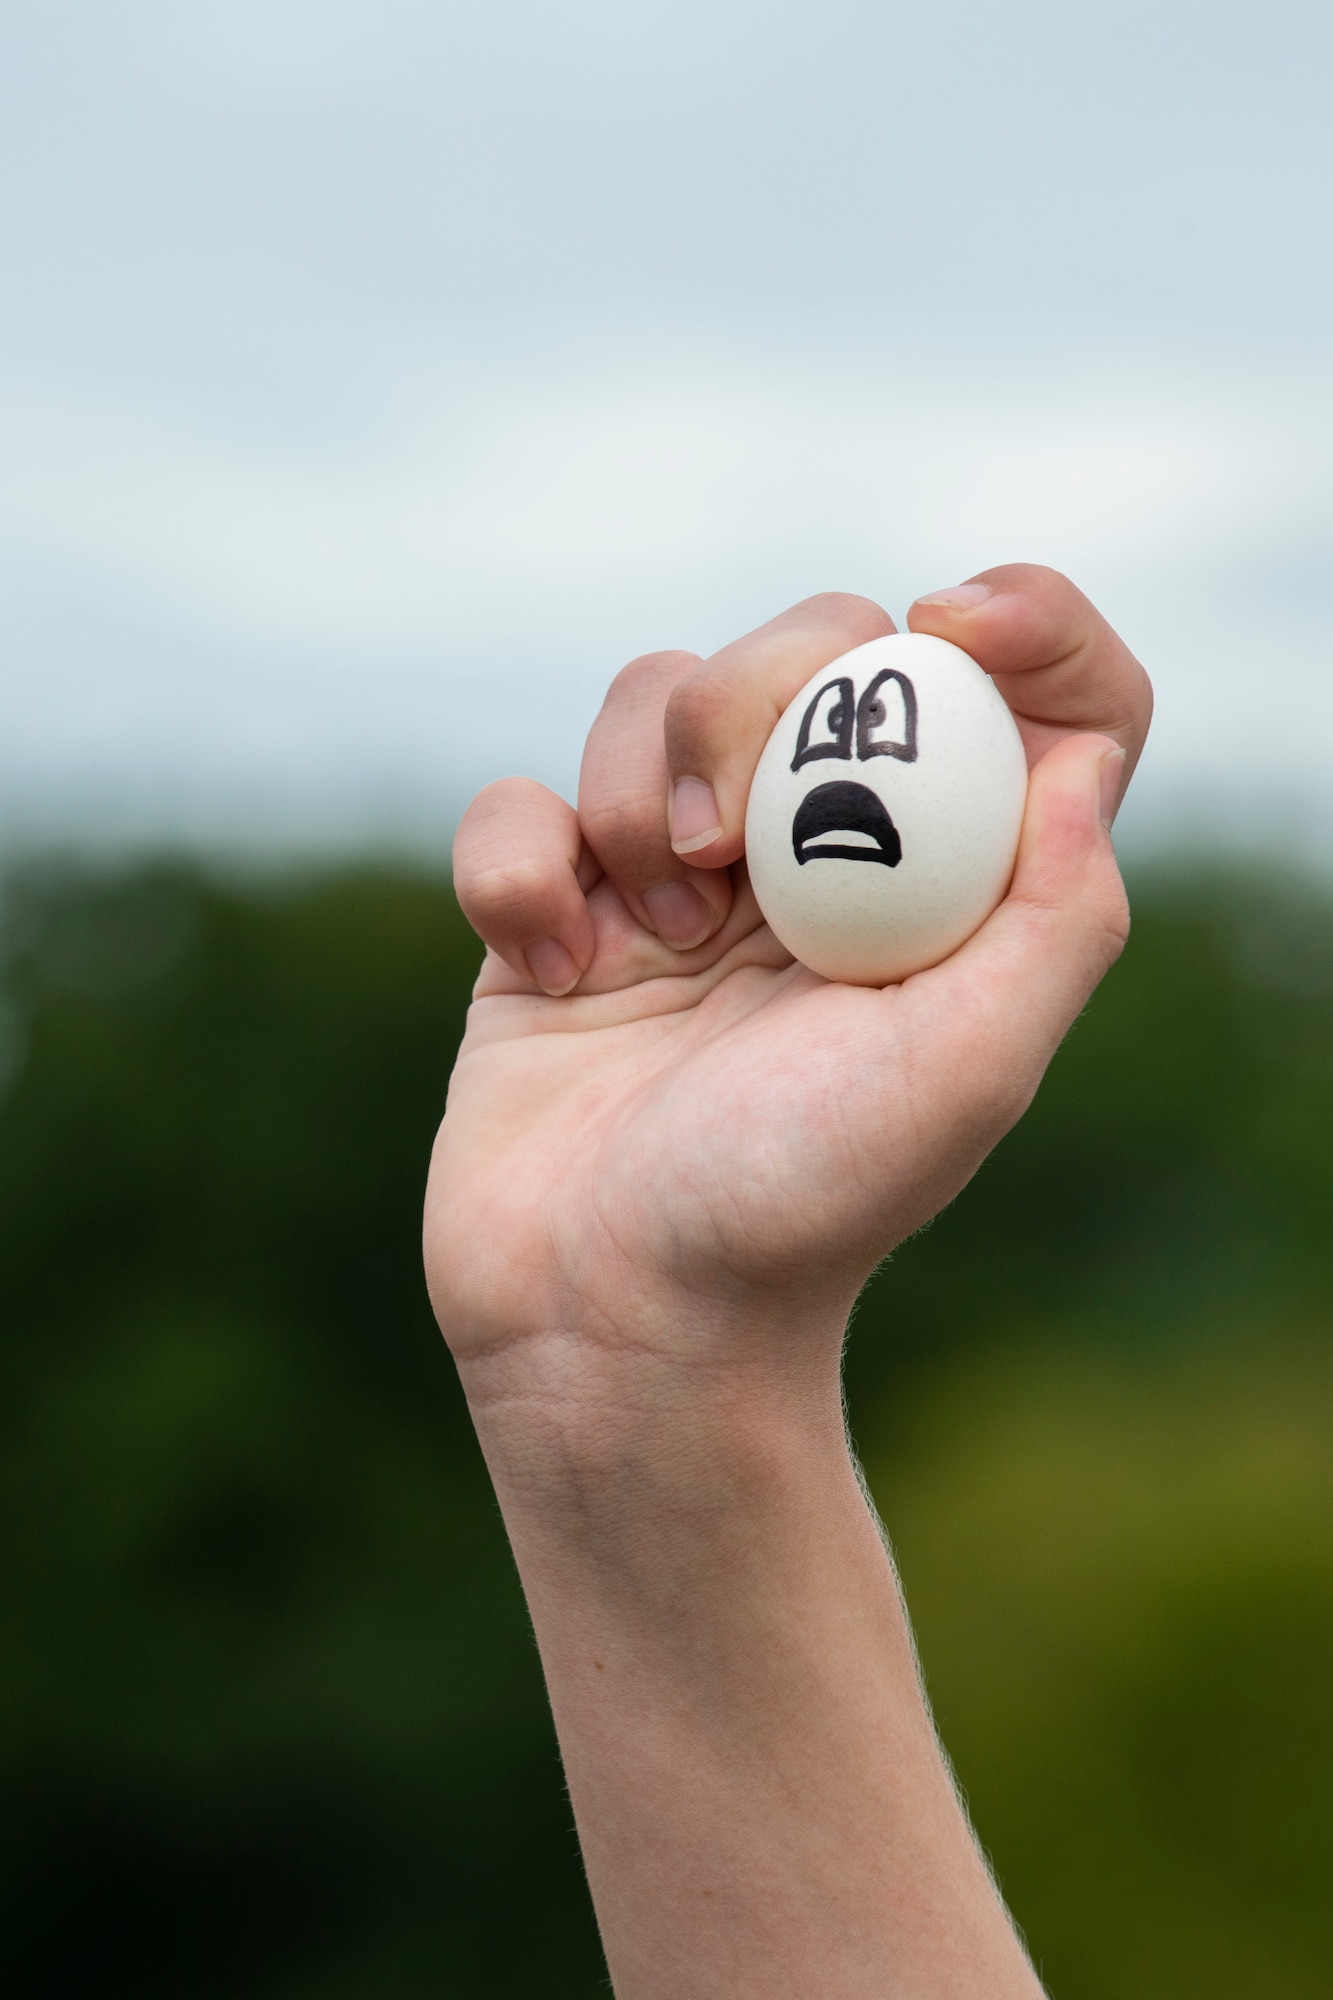 Photo of young hand holding an egg with expression drawn on it.